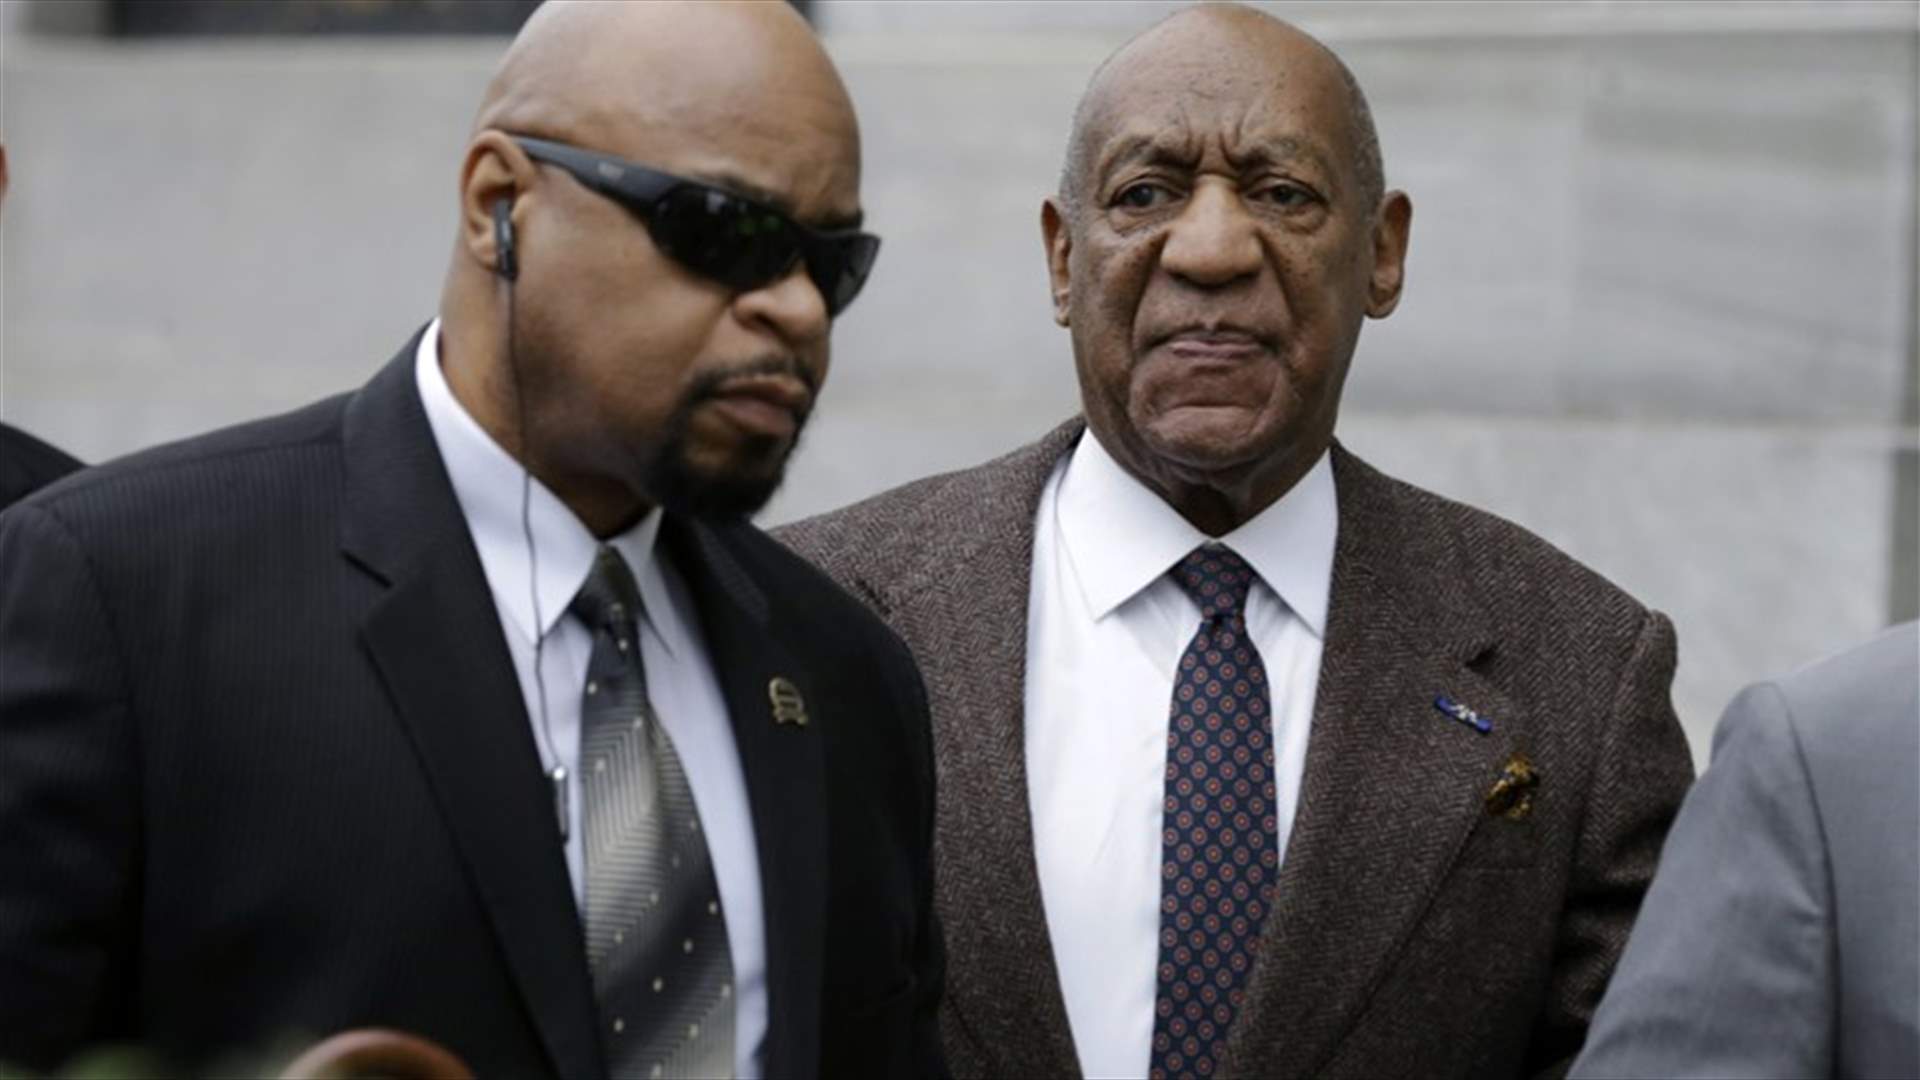 Cosby arrives at Pennsylvania court in sex assault case